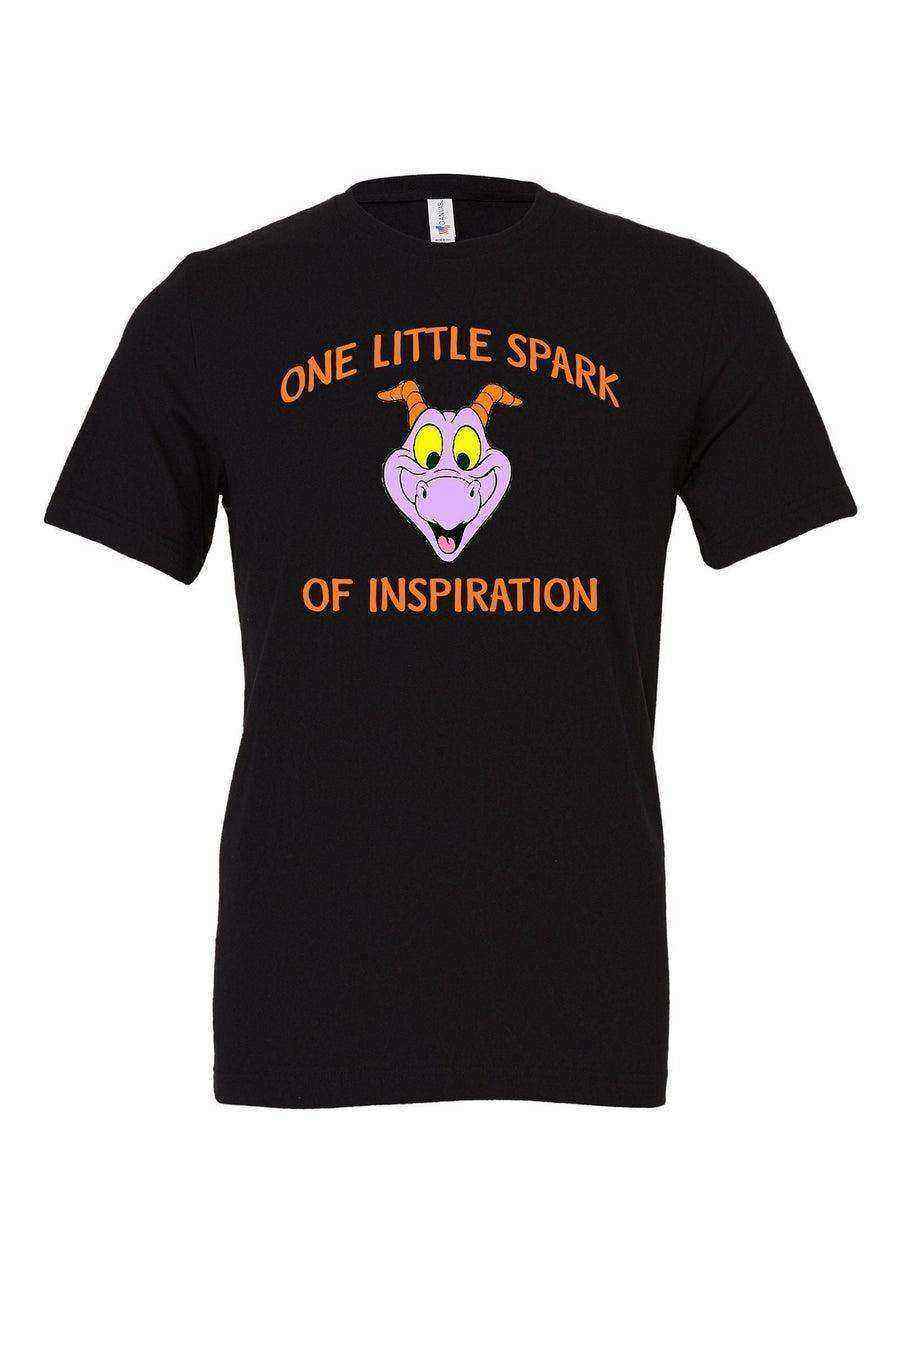 Youth | Figment One Little Spark Tee | Imagination - Dylan's Tees